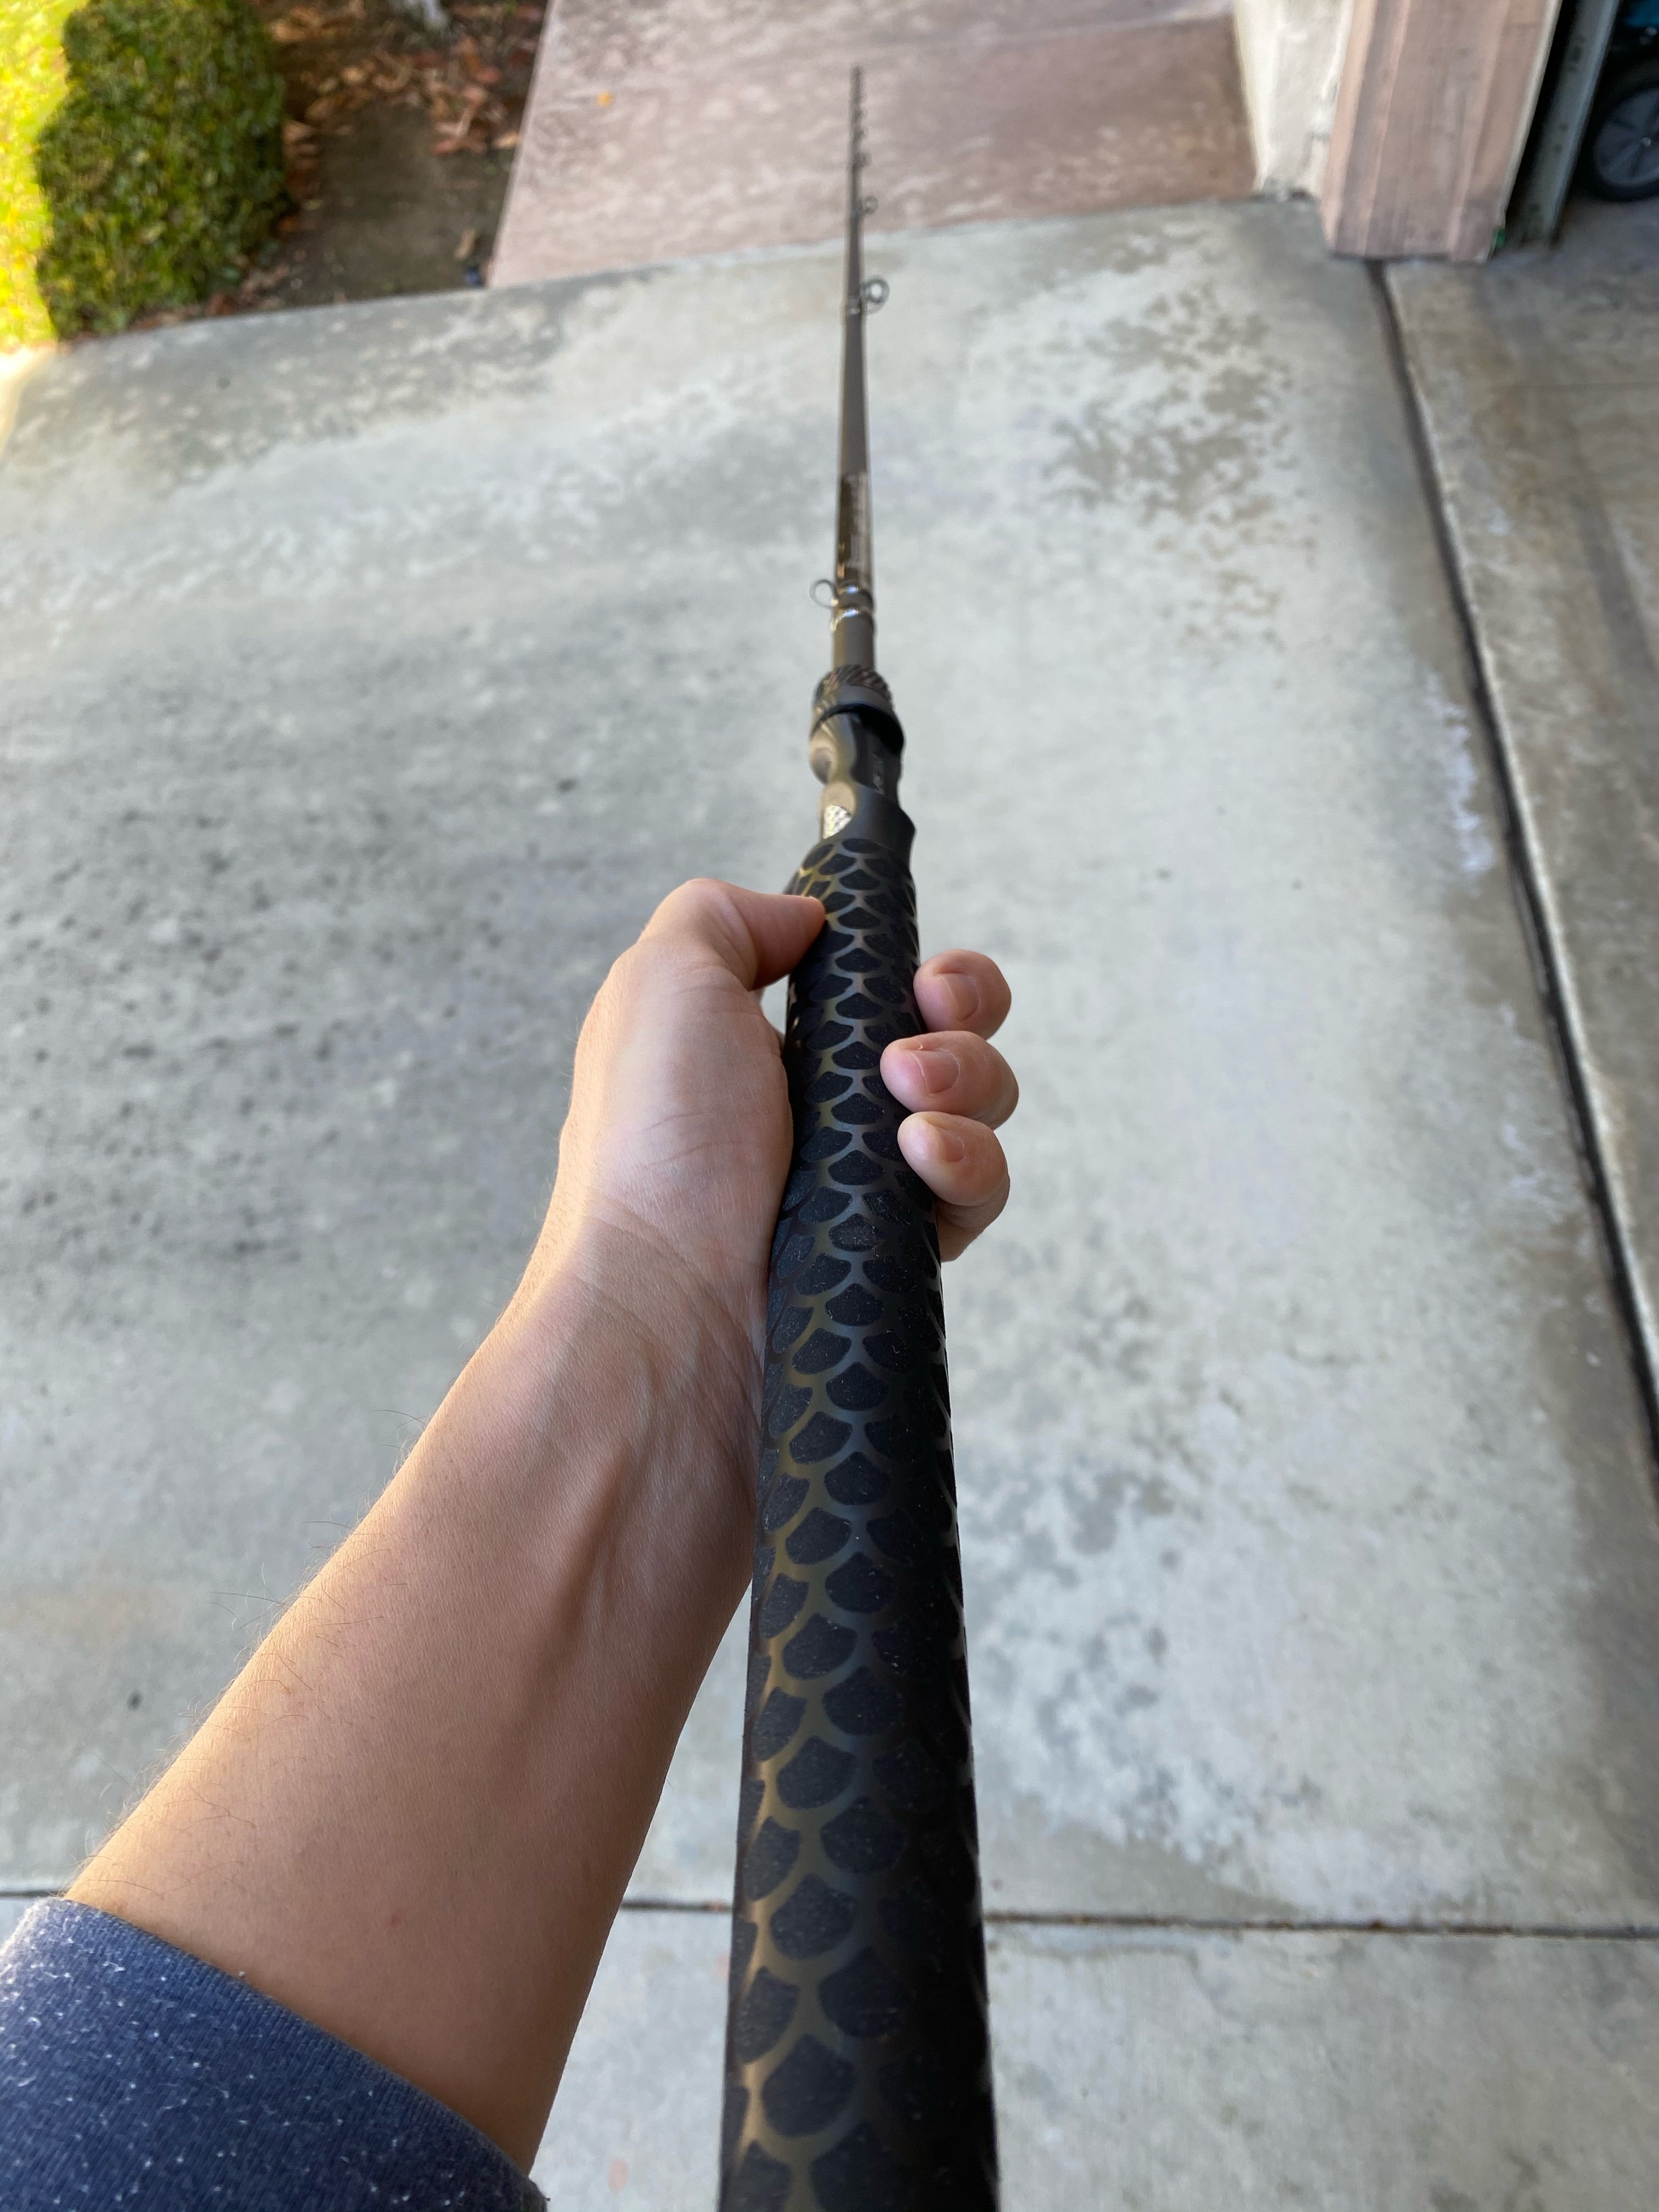 For Sale Leviathan Omega Swimbait Rod Xh Brand New F Mvt Mh